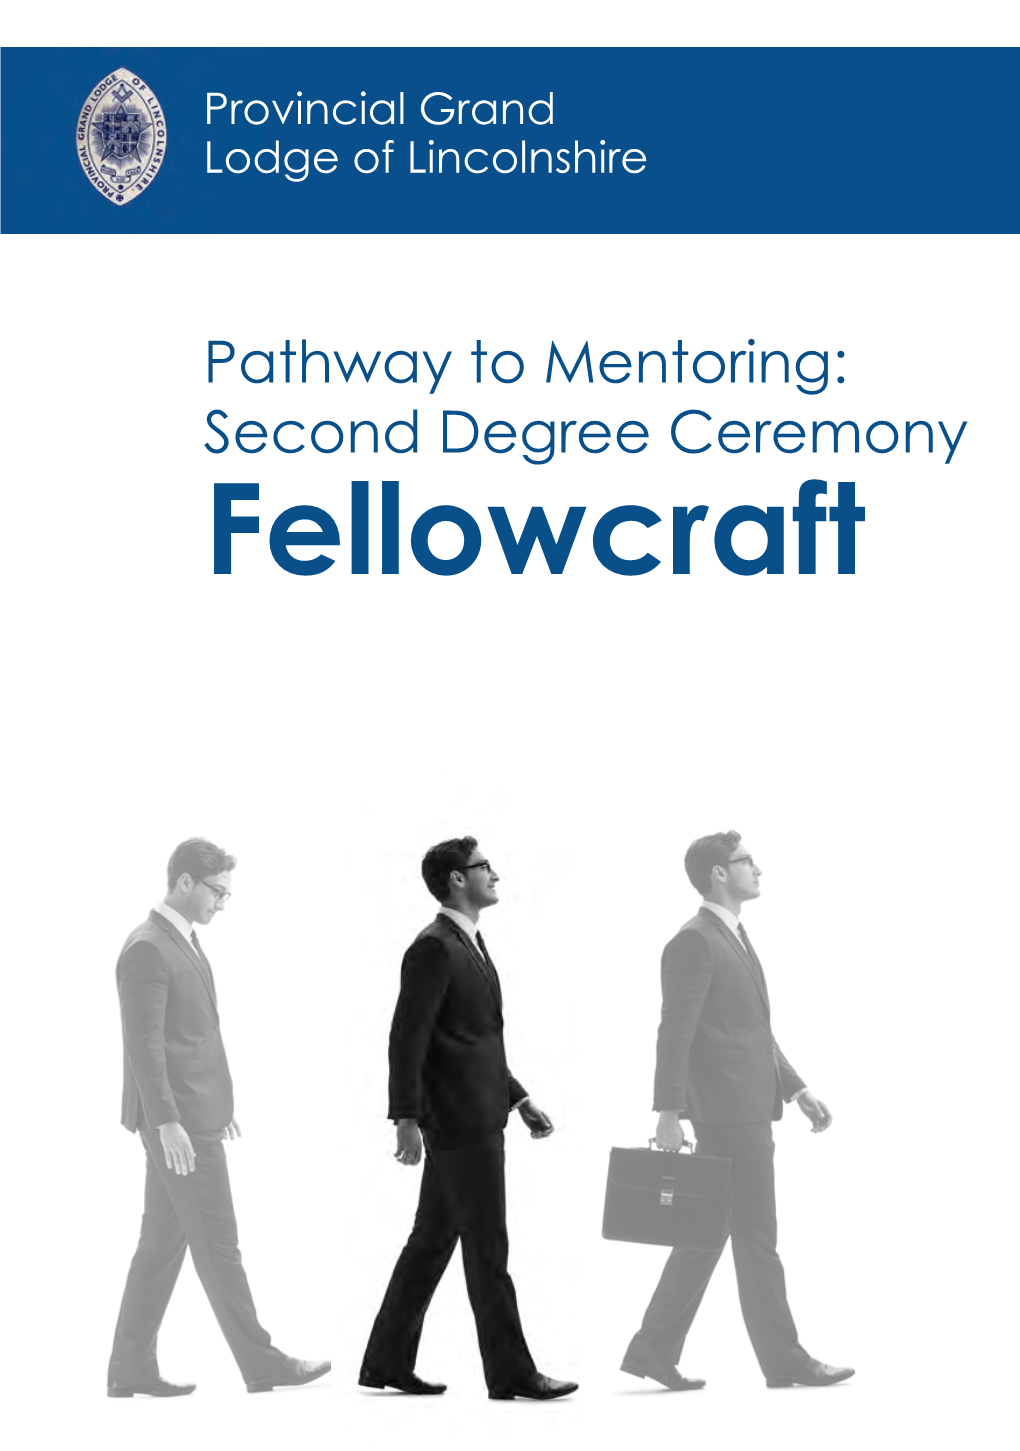 Second Degree Ceremony Fellowcraft Pathway Books Fellow Craft FINAL October 22Nd.Qxp Layout 1 22/10/2019 13:38 Page 2